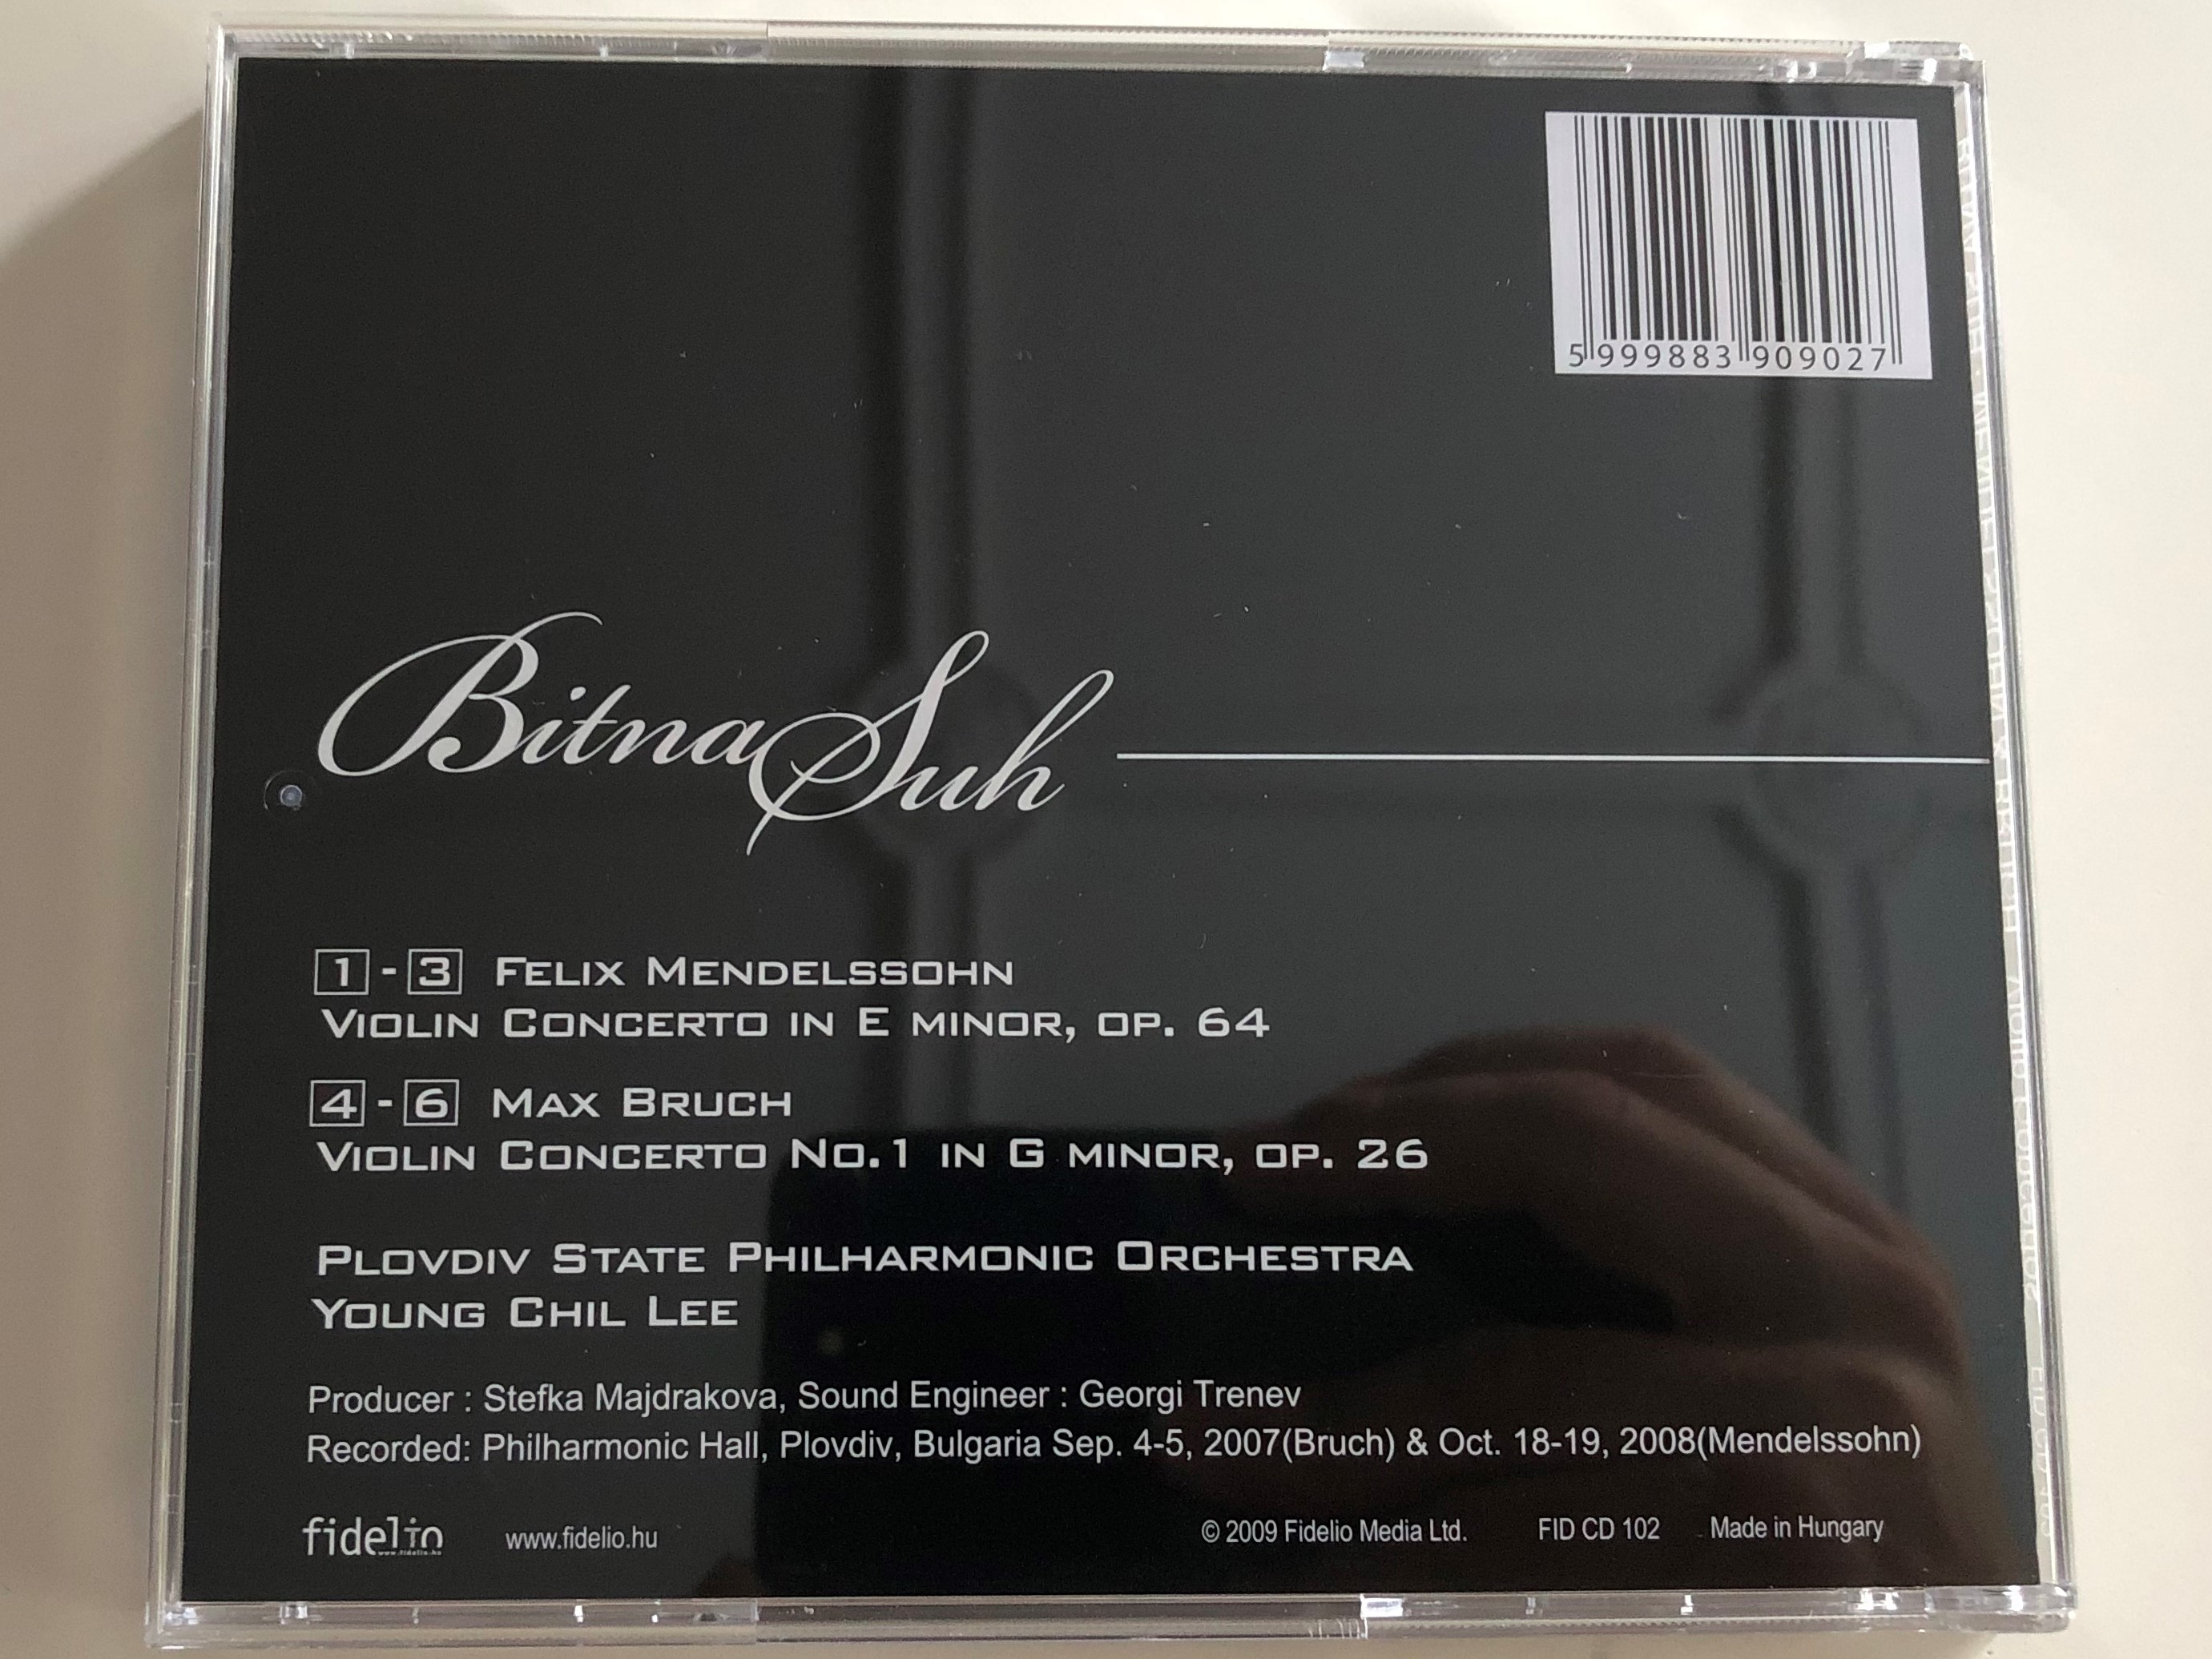 bitna-suh-mendelssohn-bruch-violin-concertos-plovdiv-state-philharmonic-orchestra-conducted-by-young-chil-lee-audio-cd-2009-fid-cd-102-8-.jpg